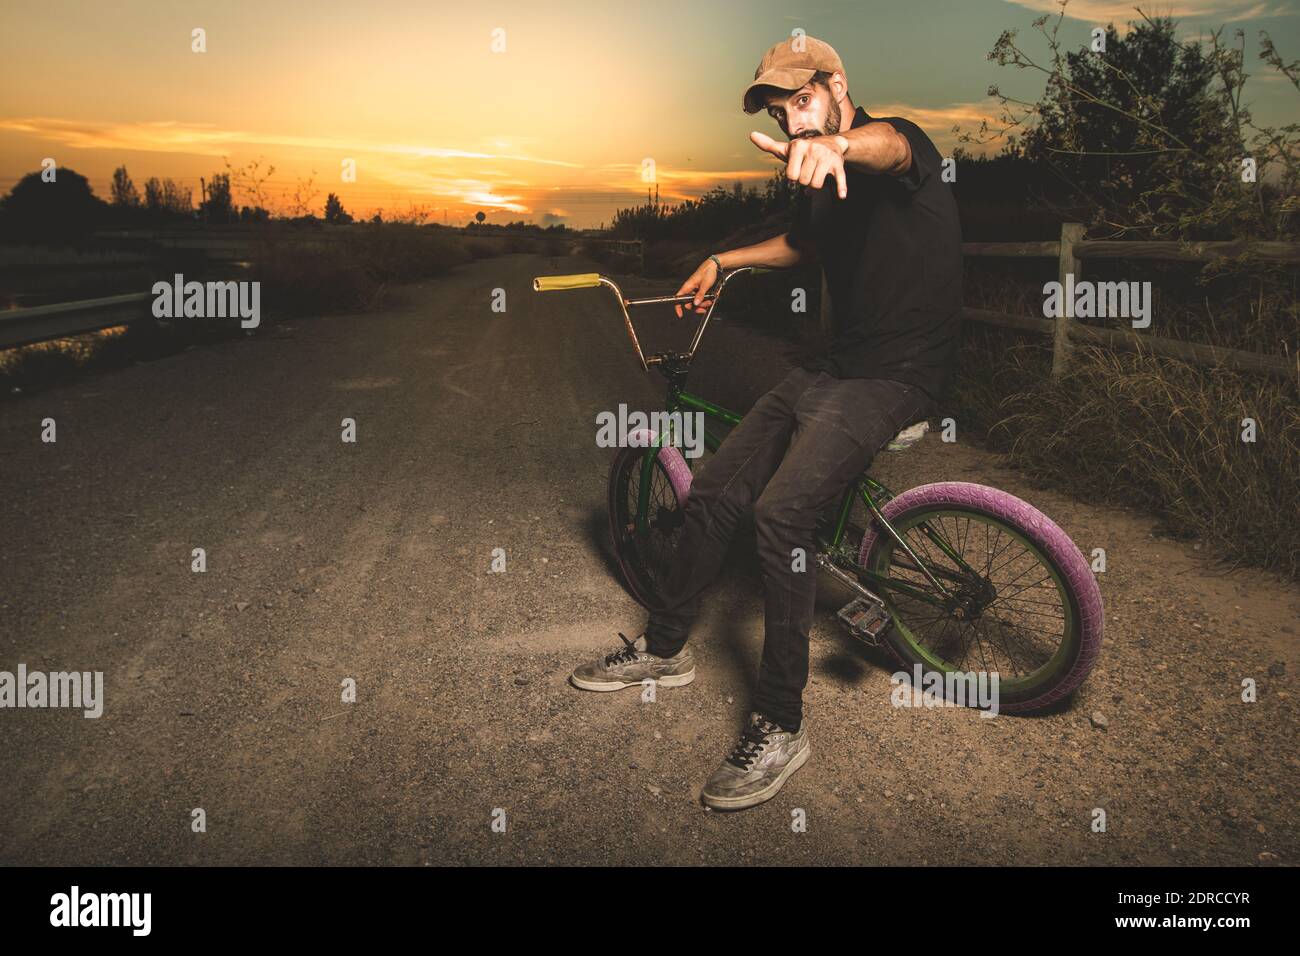 Portrait Of Man Gesturing Shaka Sign While Sitting On Bicycle Against Sky During Sunset Stock Photo